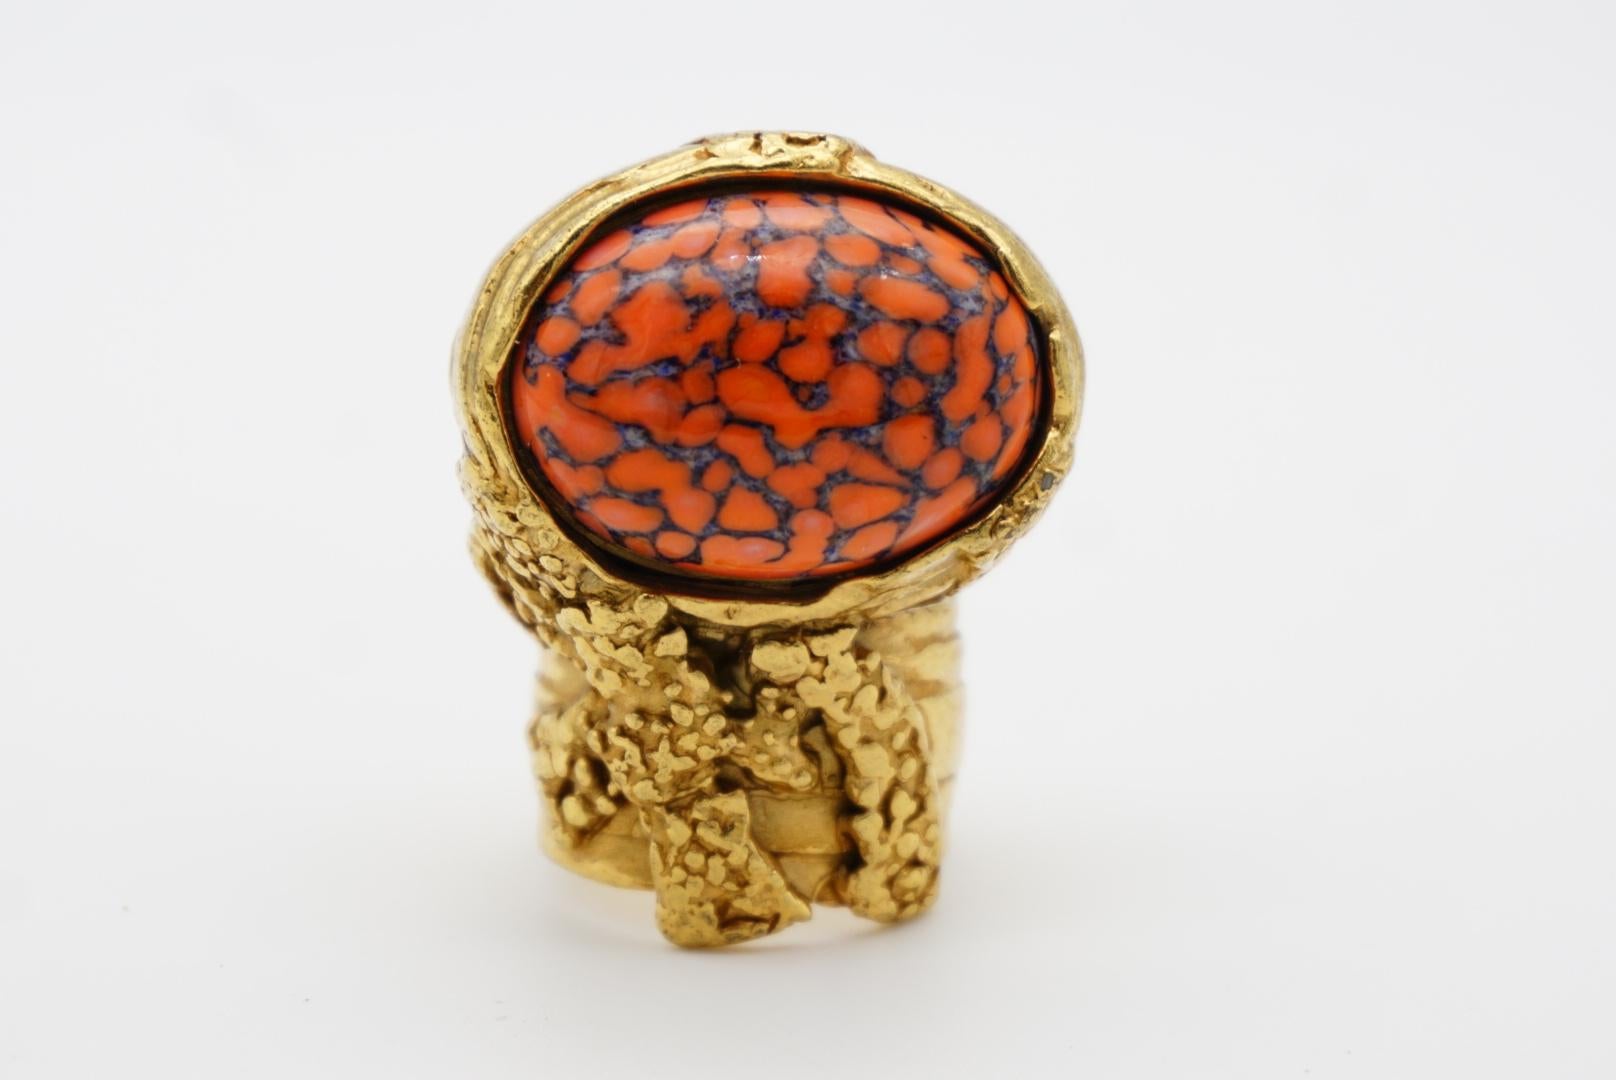 Yves Saint Laurent YSL Arty Orange Coral Cabochon Marble Chunky Ring, Size 7 In Excellent Condition For Sale In Wokingham, England